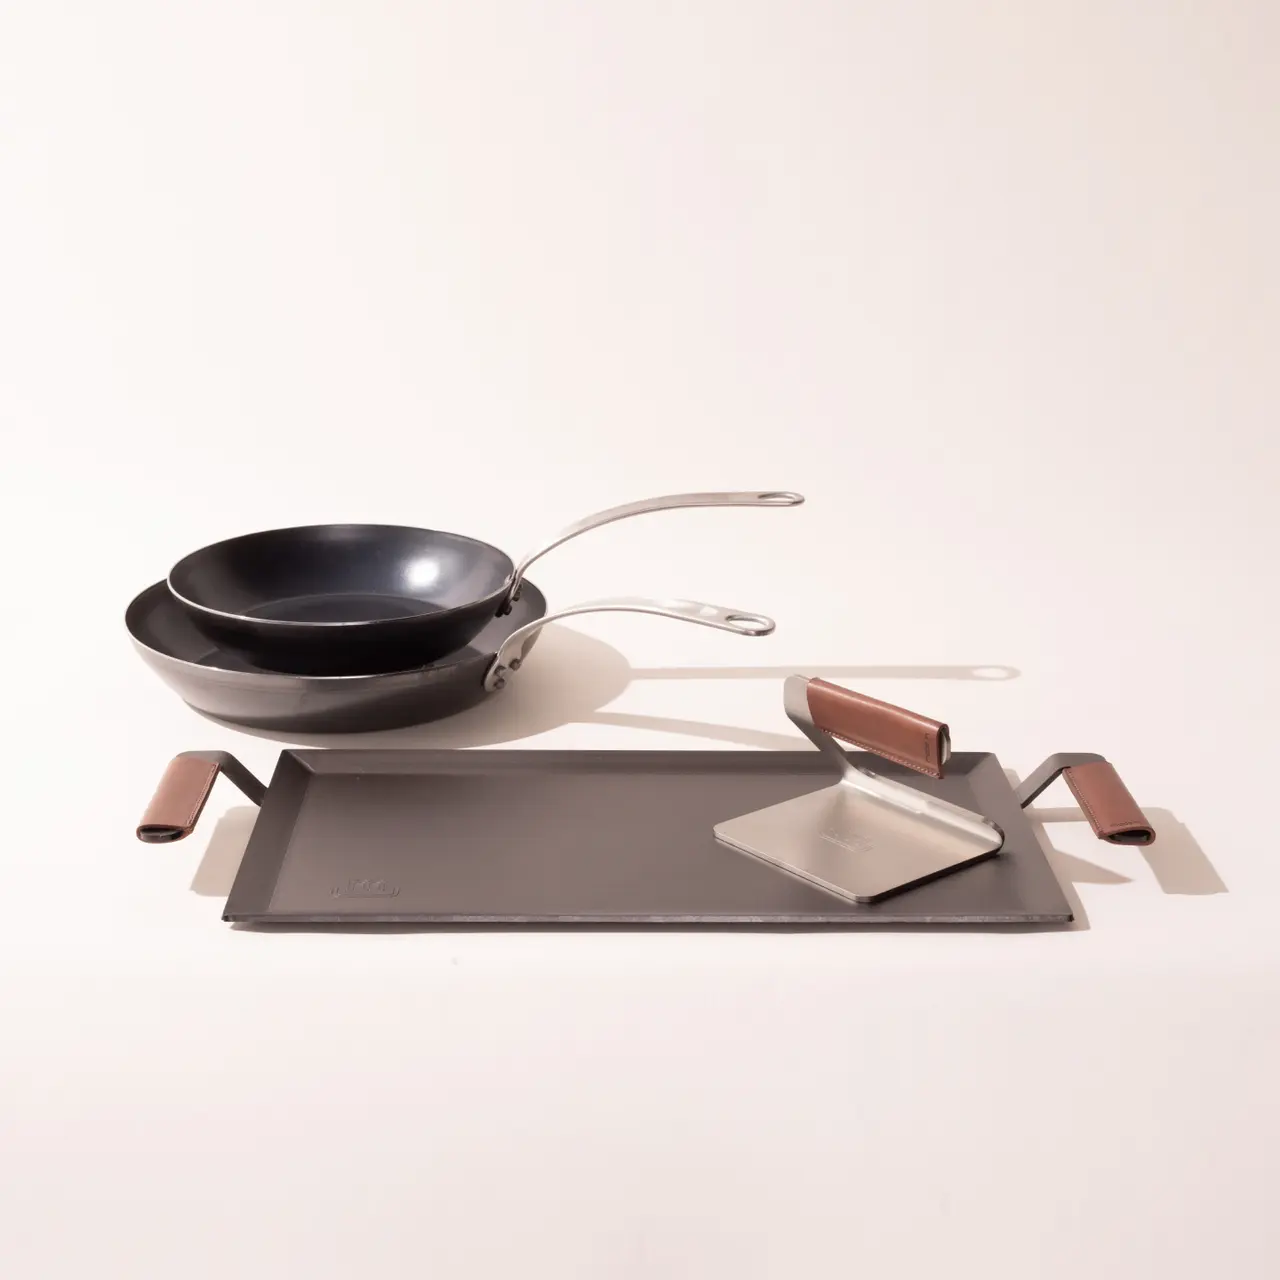 Two pans are positioned on a flat surface alongside a spatula and a pair of pot holders.